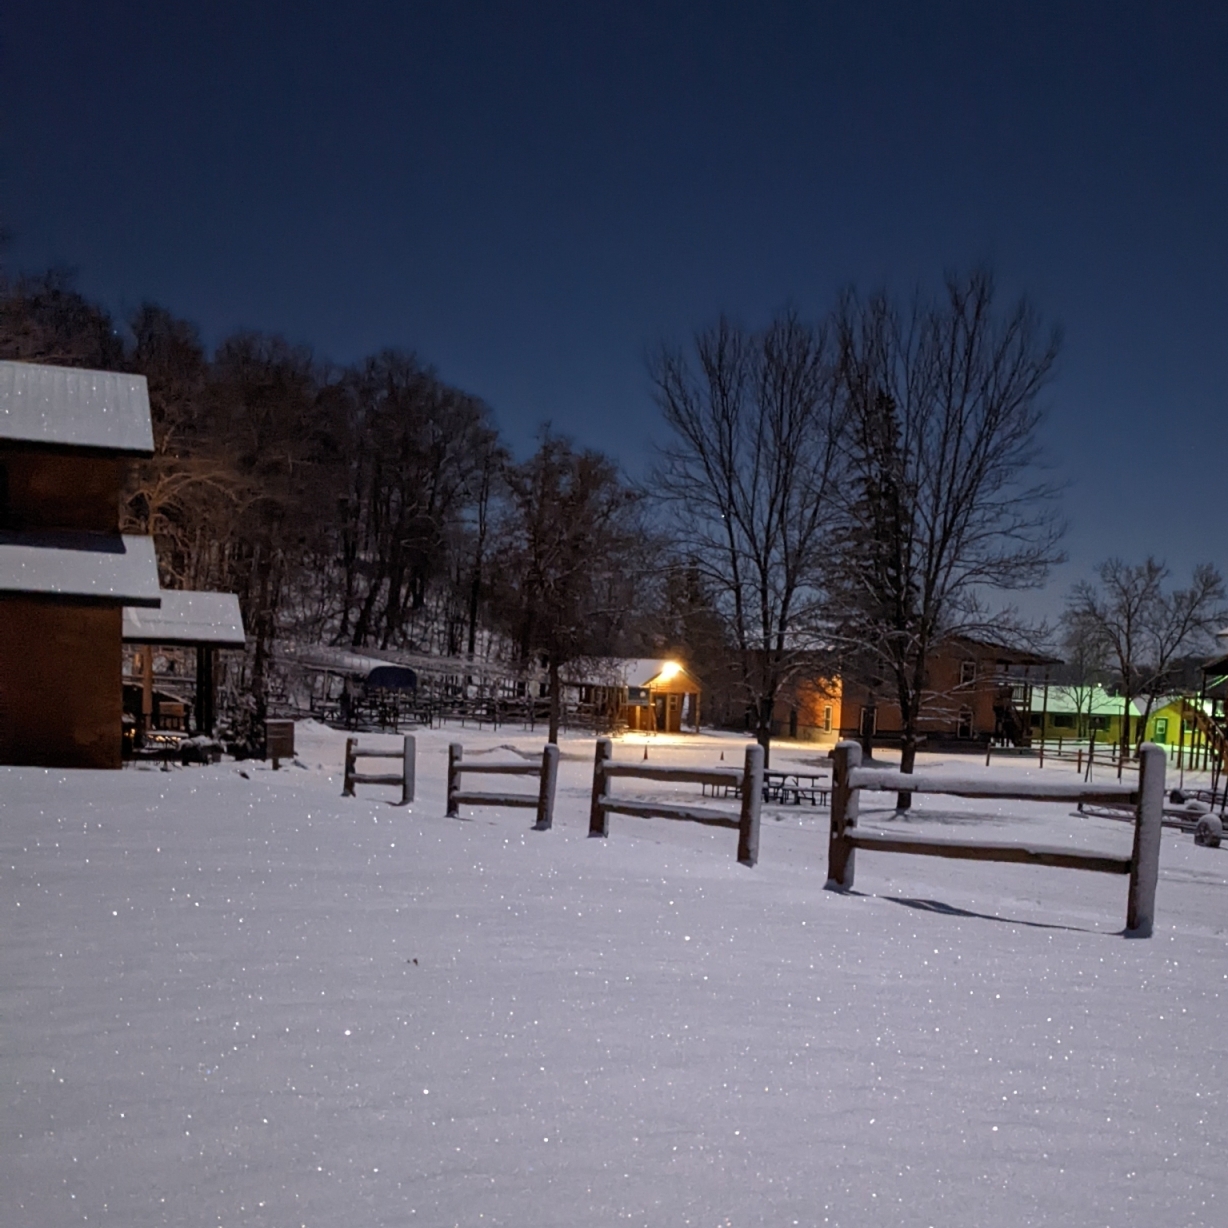 Winter nights are beautiful during holidays at the lake cabin